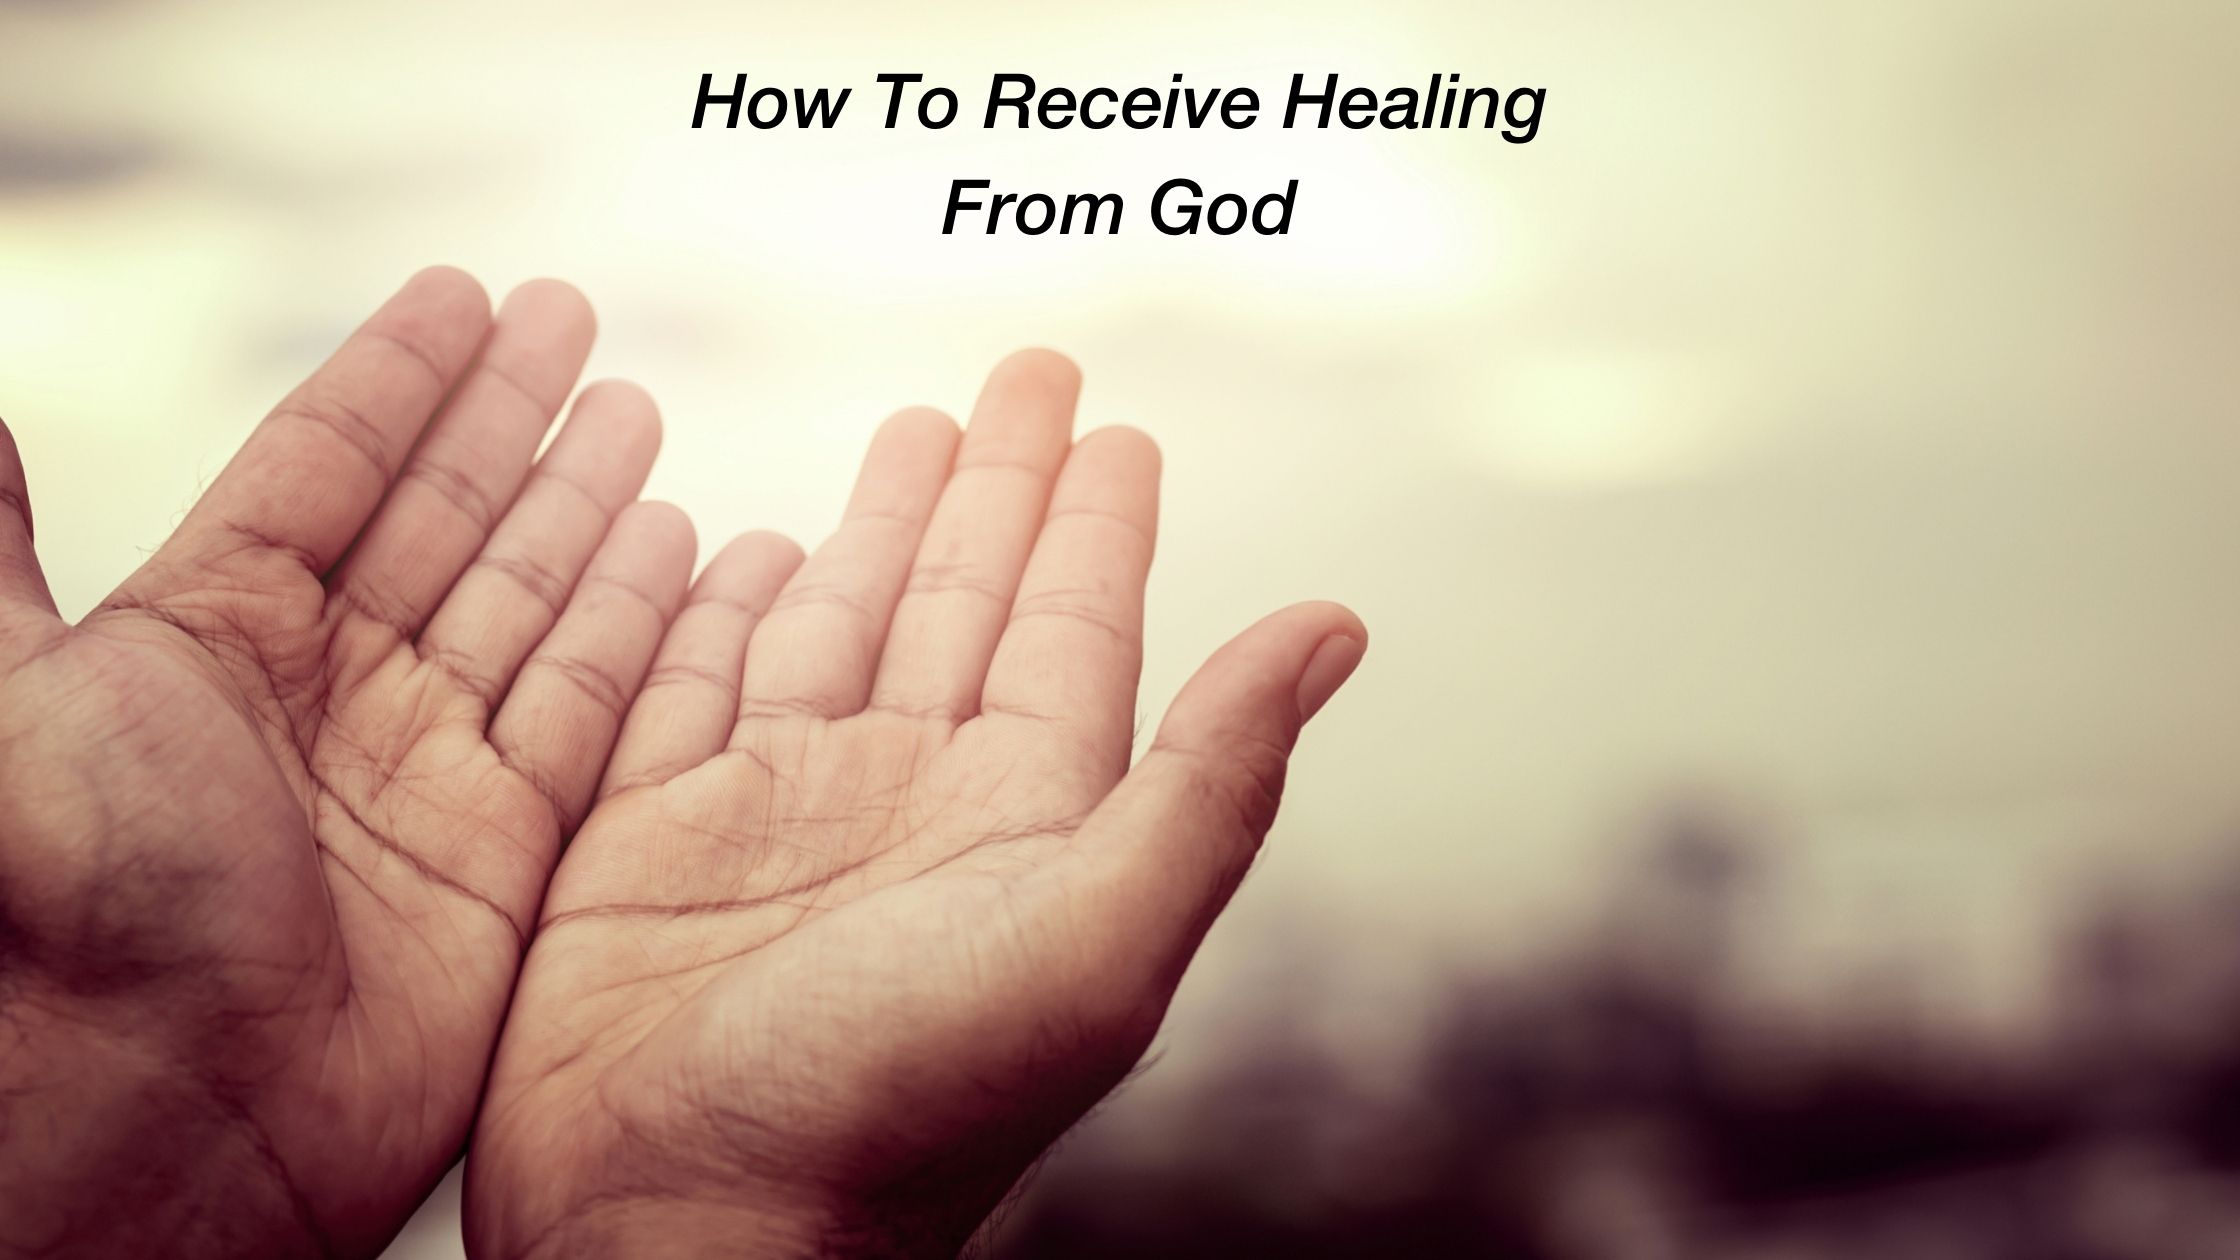 How to Receive Your Healing From God